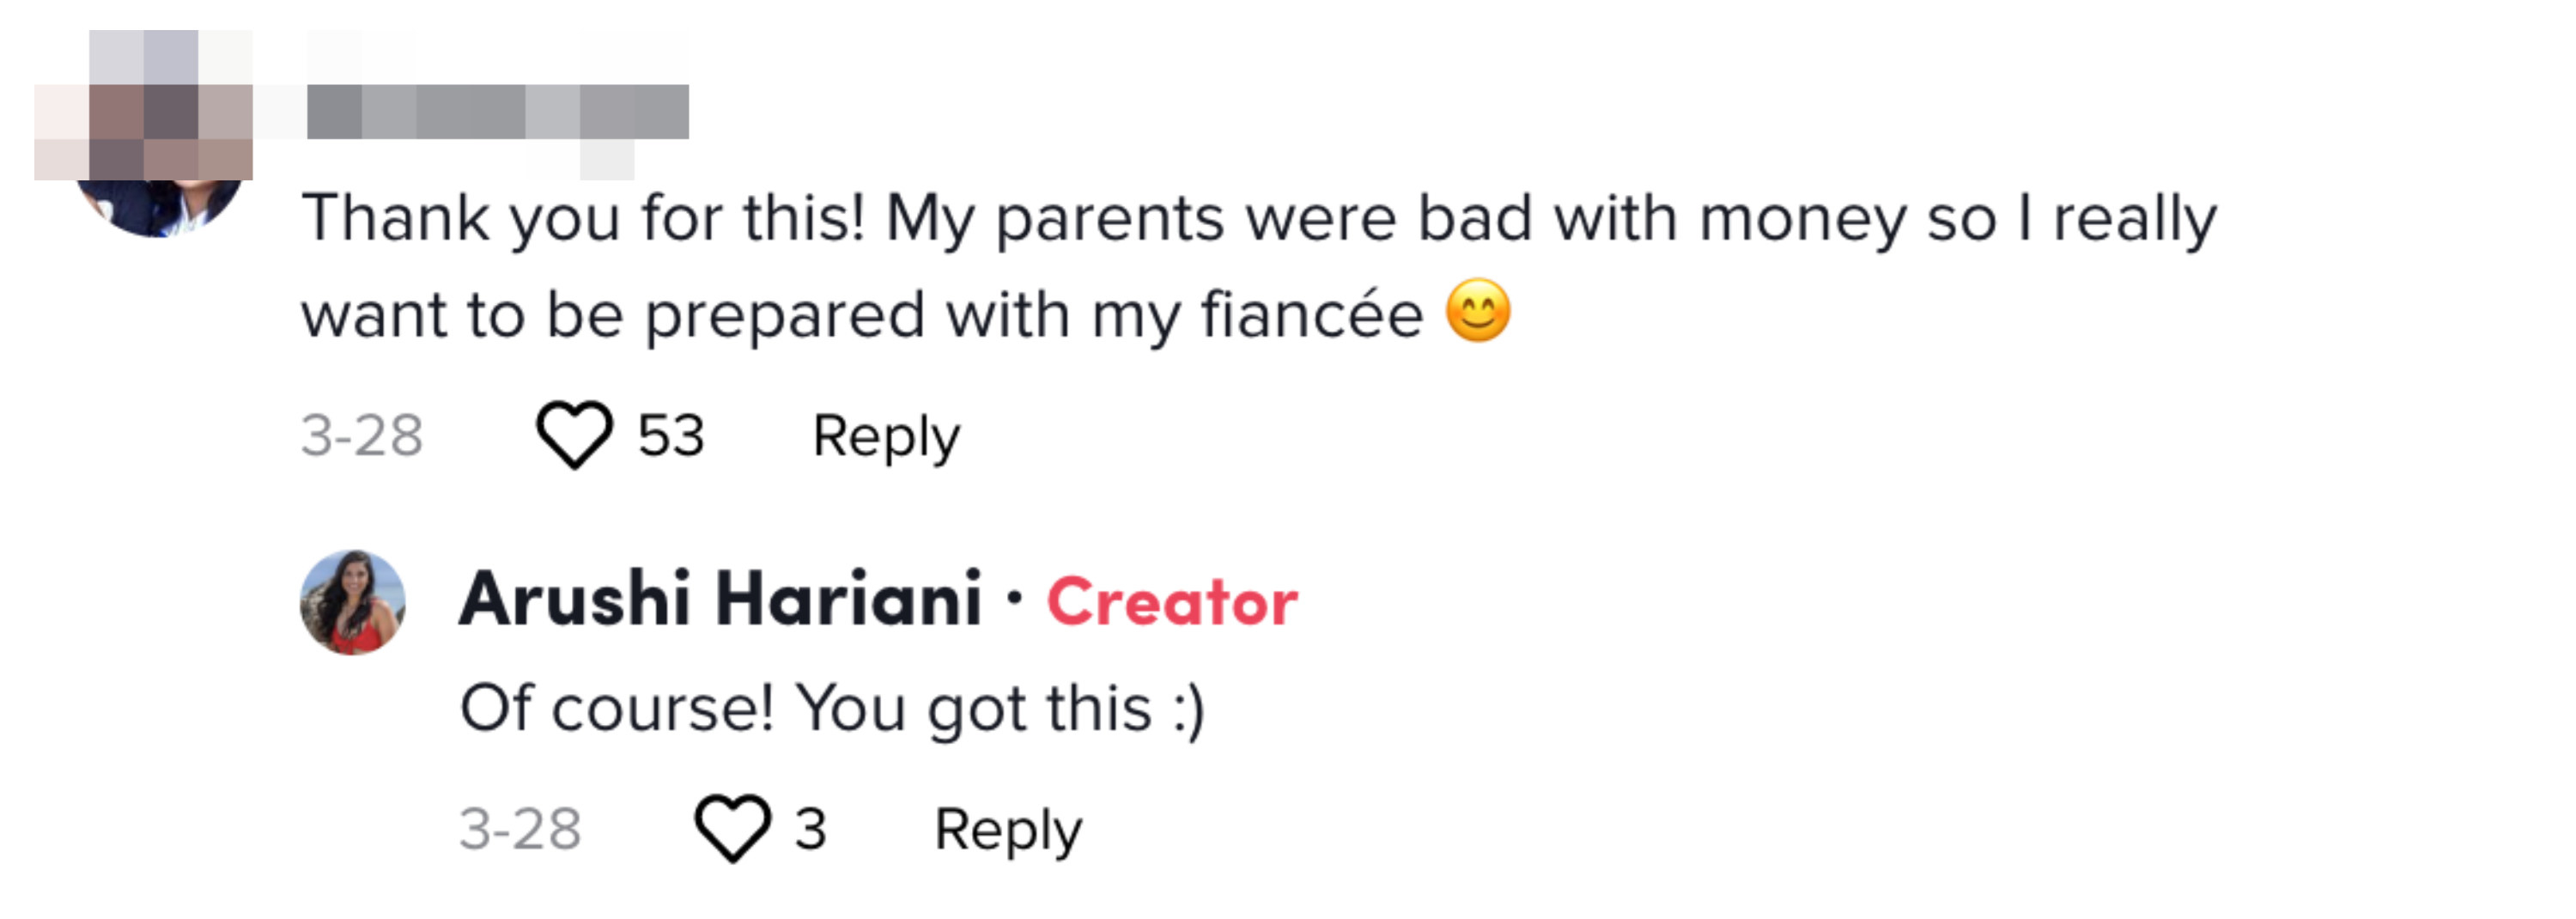 TikTok comment stating, &quot;Thank you for this! My parents were bad with money so I really want to be prepared with my fiancee.&quot; Arushi Hariani responds, &quot;Of course! you got this :)&quot;